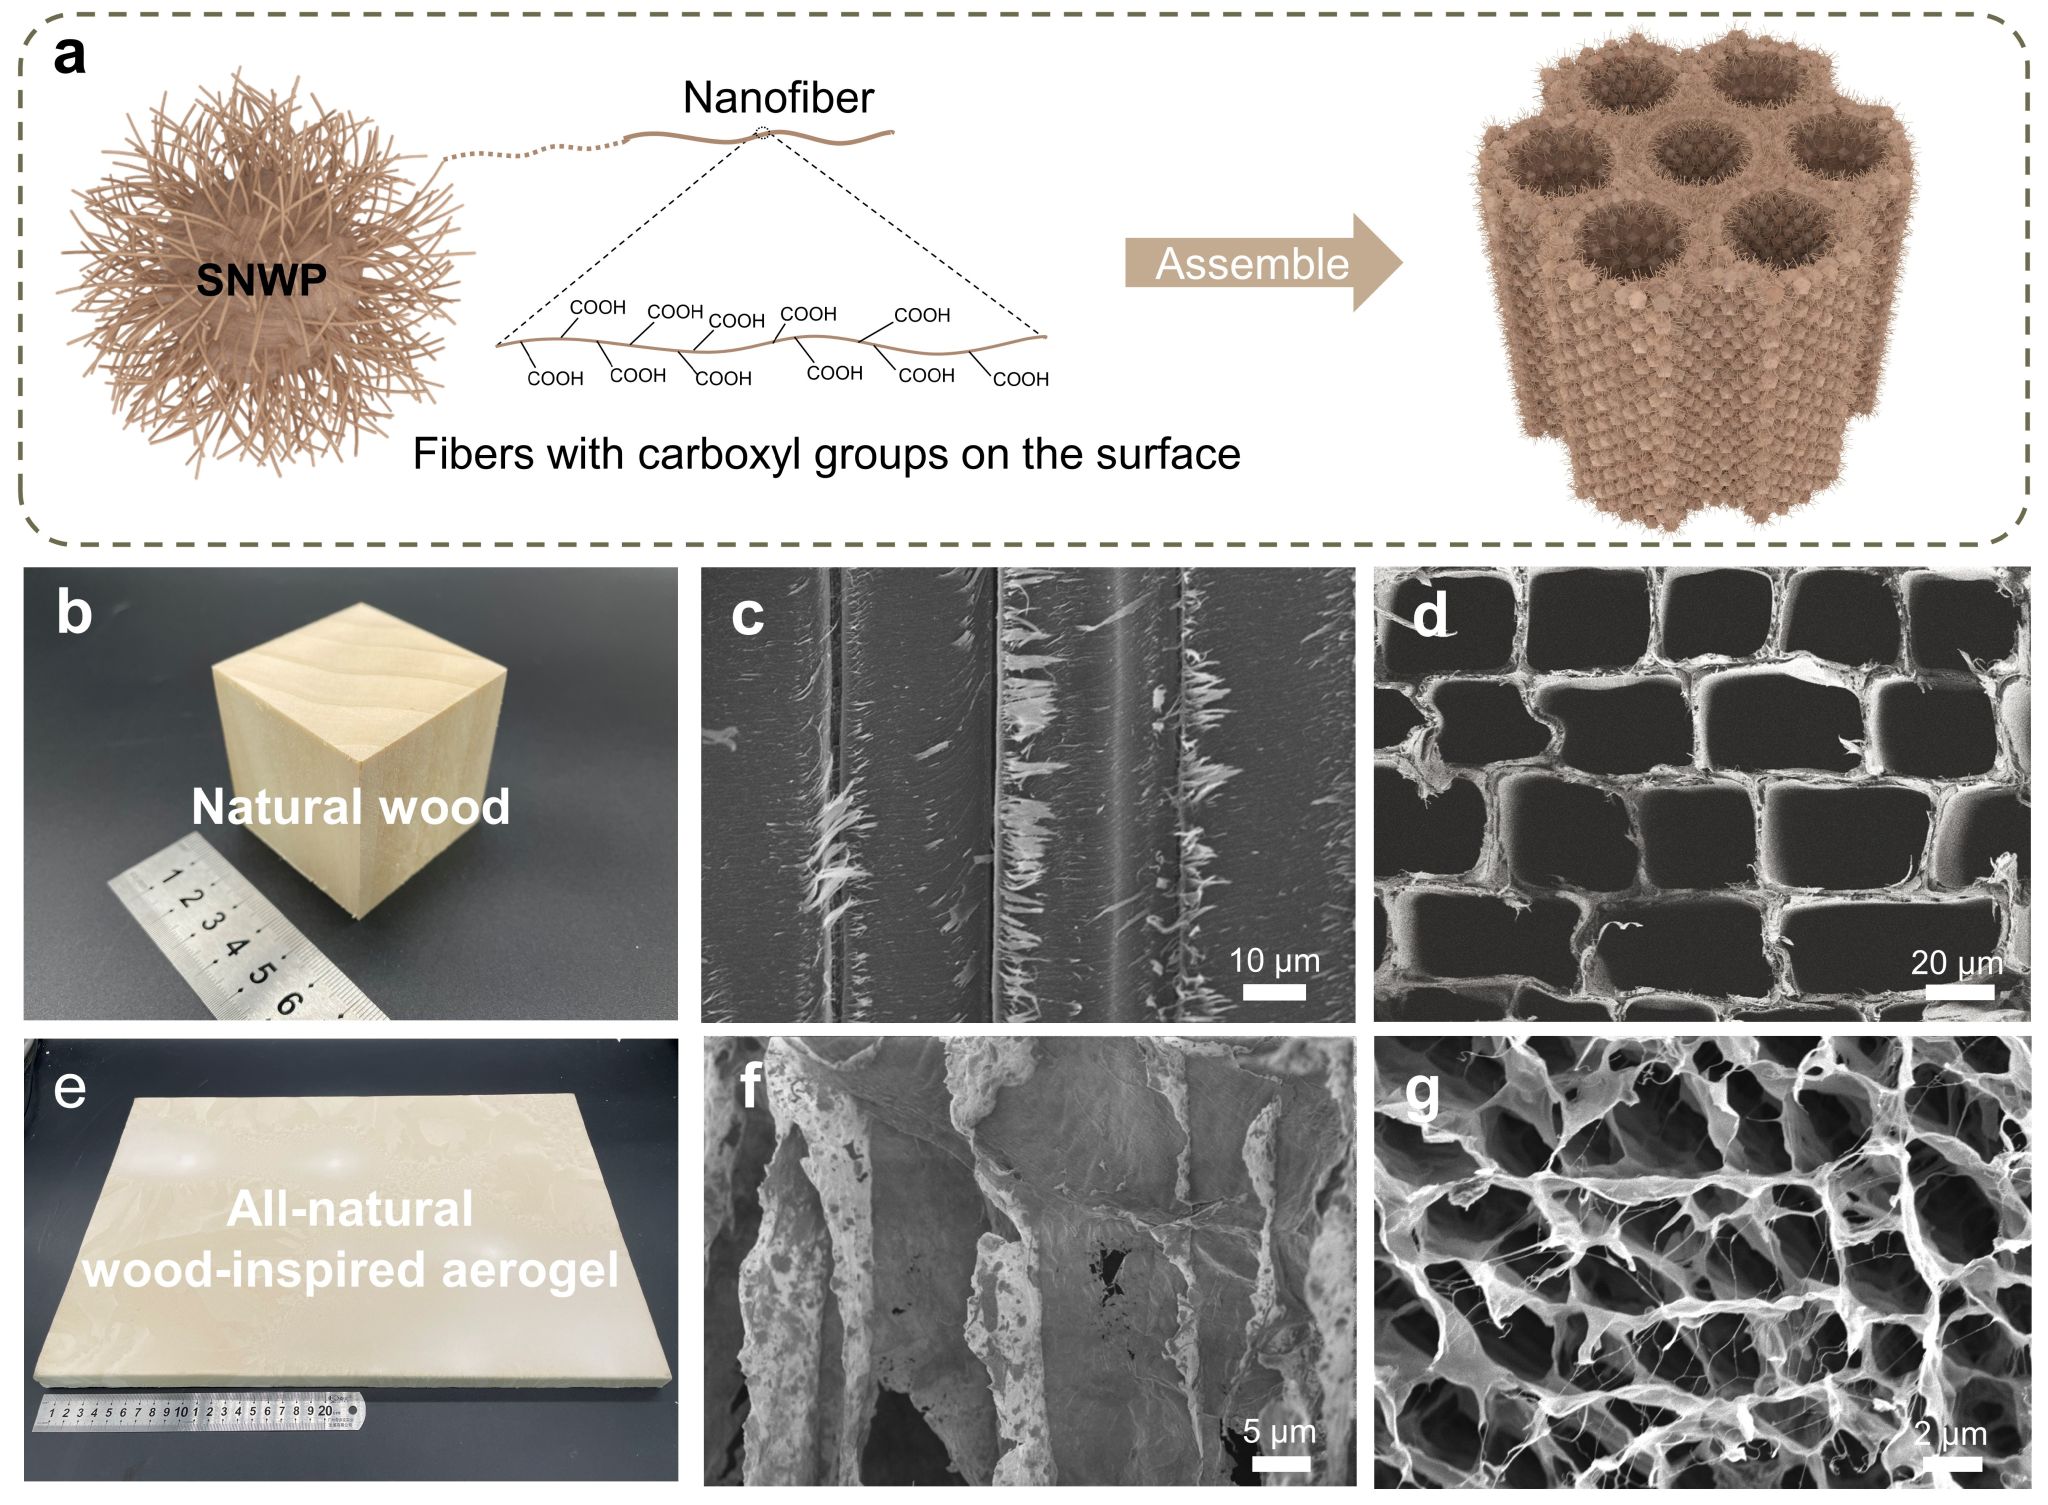 A schematic diagram shows the structure of the all-natural wood-inspired aerogel. /University of Science and Technology of China